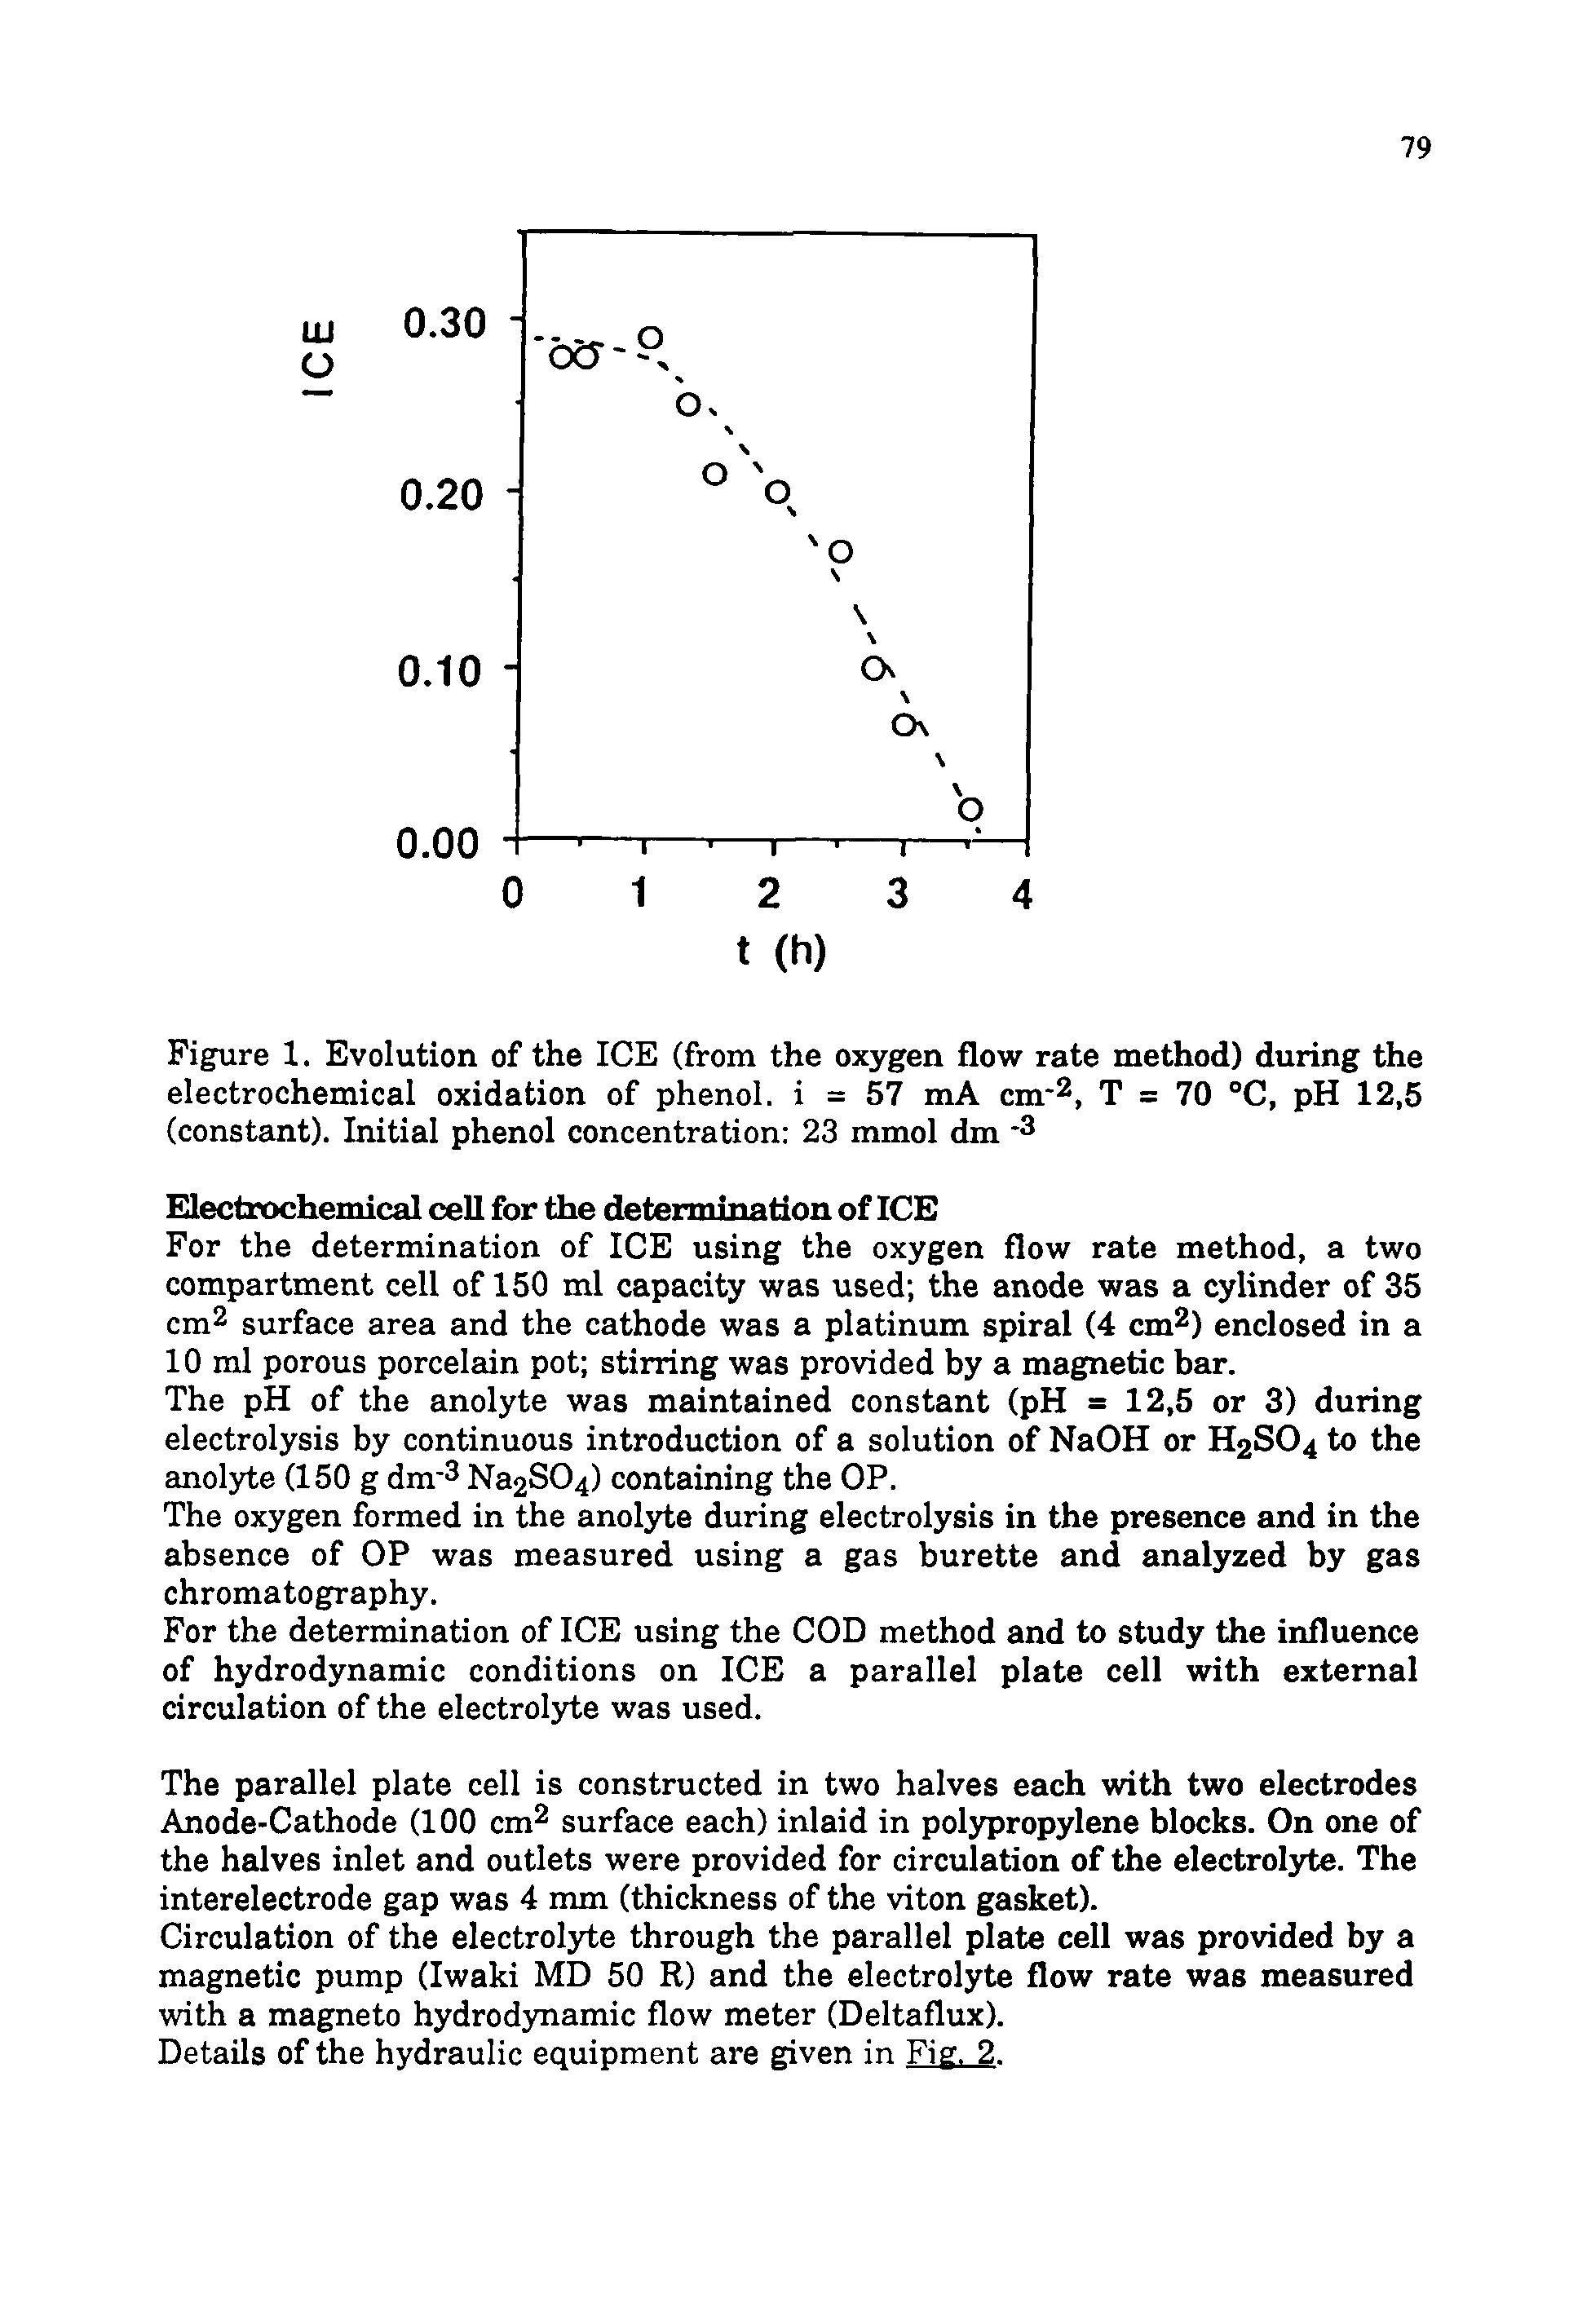 Figure 1. Evolution of the ICE (from the oxygen flowr rate method) during the electrochemical oxidation of phenol, i = 57 mA cm-2, T = 70 °C, pH 12,5 (constant). Initial phenol concentration 23 mmol dm 3...